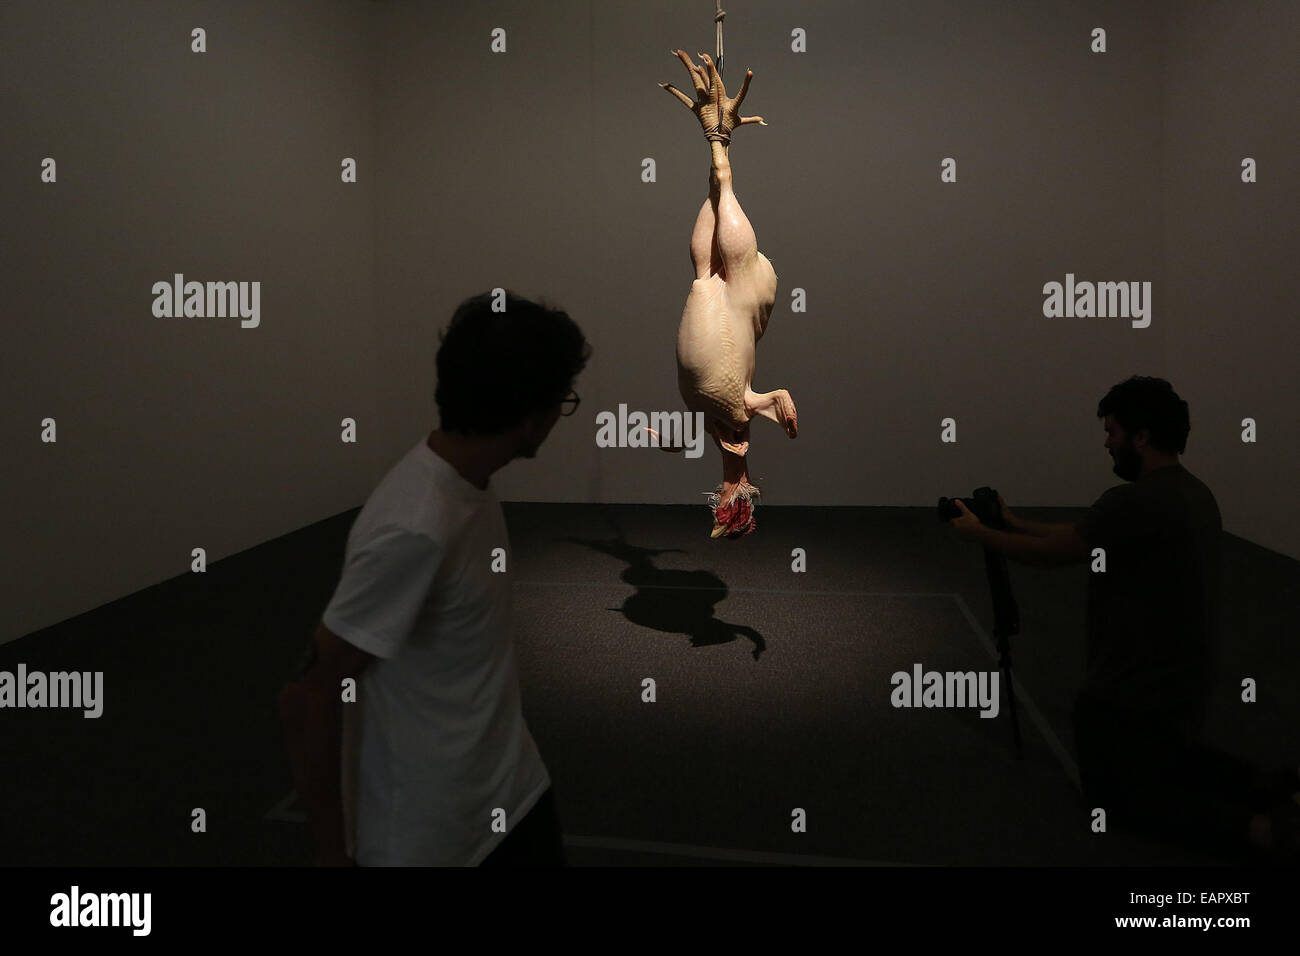 (141120) -- SAO PAULO, Nov. 20, 2014 -- Visitors watch the sculpture entitled 'Still Life' by Australian artist Ron Mueck, in Sao Paulo, Brazil, on Nov. 19, 2014. An exhibition of Ron Mueck will be held at the Pinacoteca of the State of Sao Paulo from Nov. 20 to Feb. 15. (Xinhua/Rahel Patrasso) (jp) Stock Photo